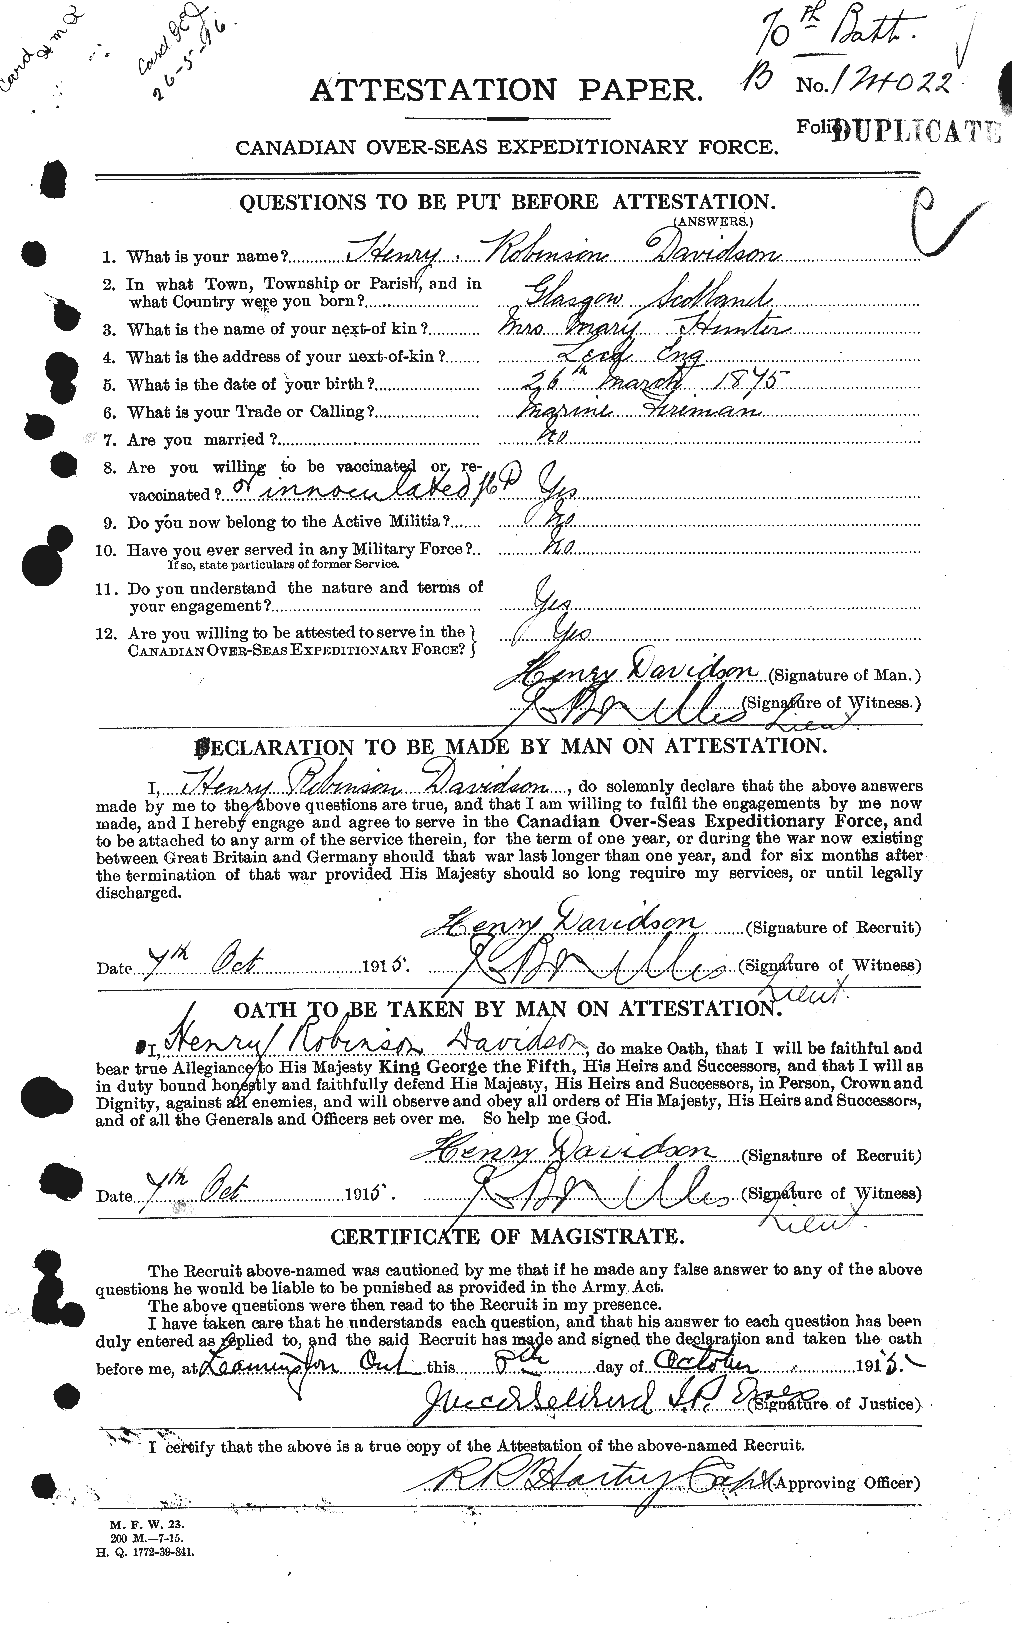 Personnel Records of the First World War - CEF 281200a